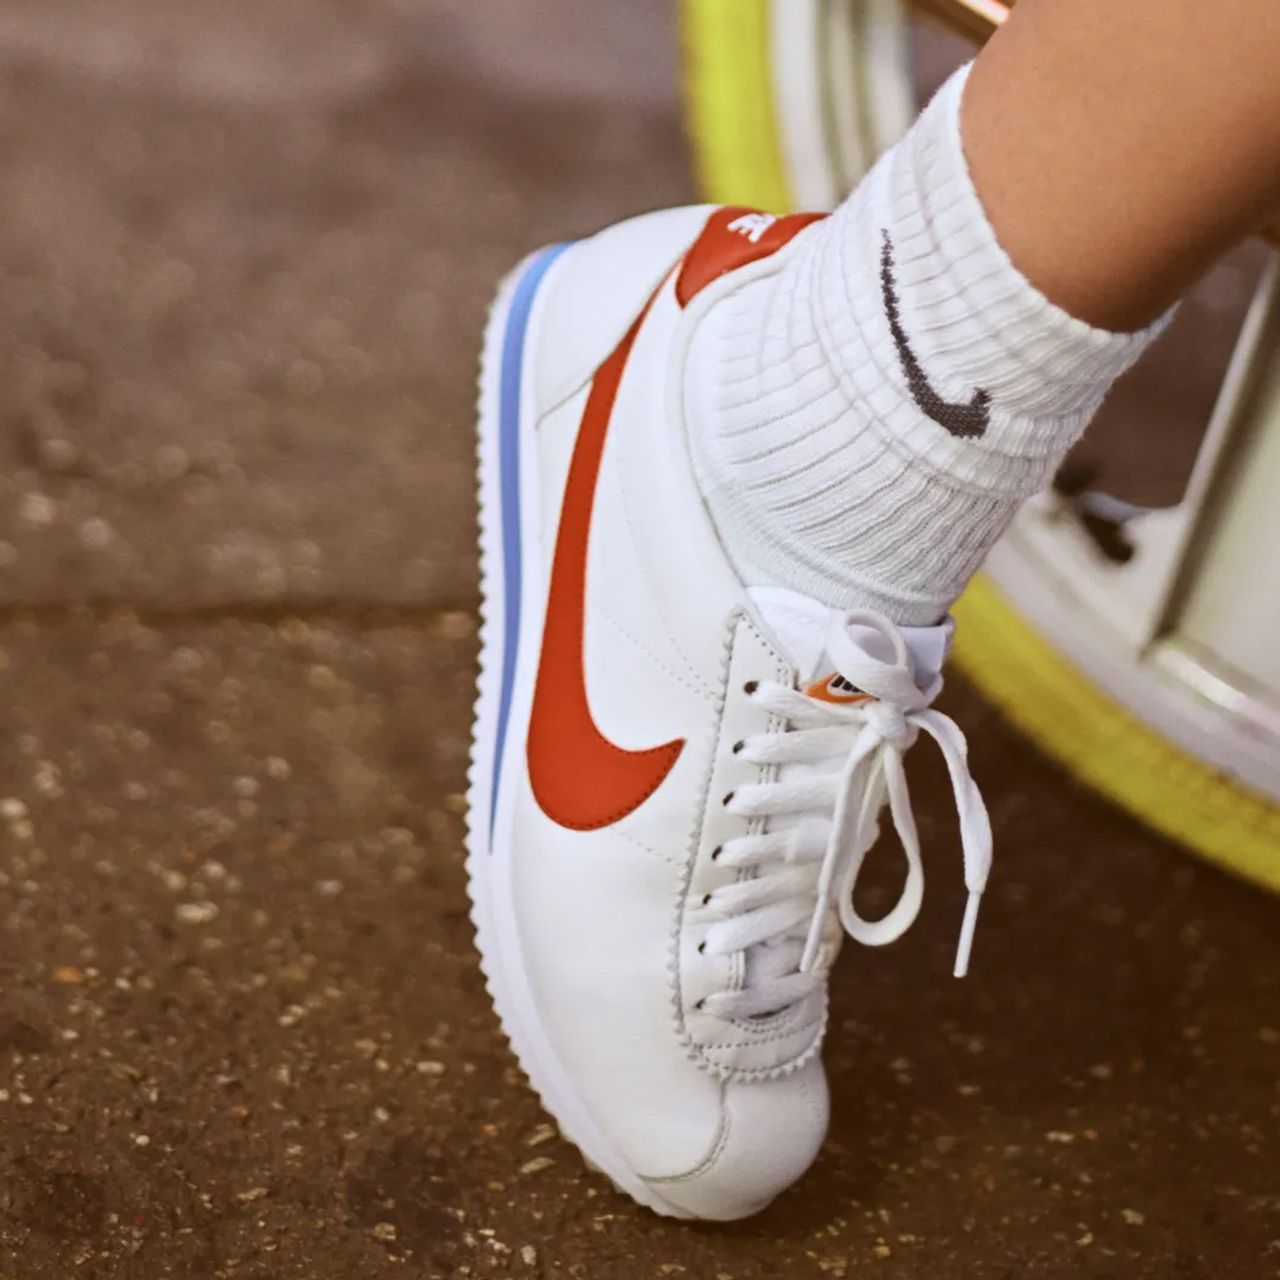 Melodieus toetje nemen Nike Bring Back The Classic Cortez Women's In Signature Red, White and Blue  - Sneaker Freaker